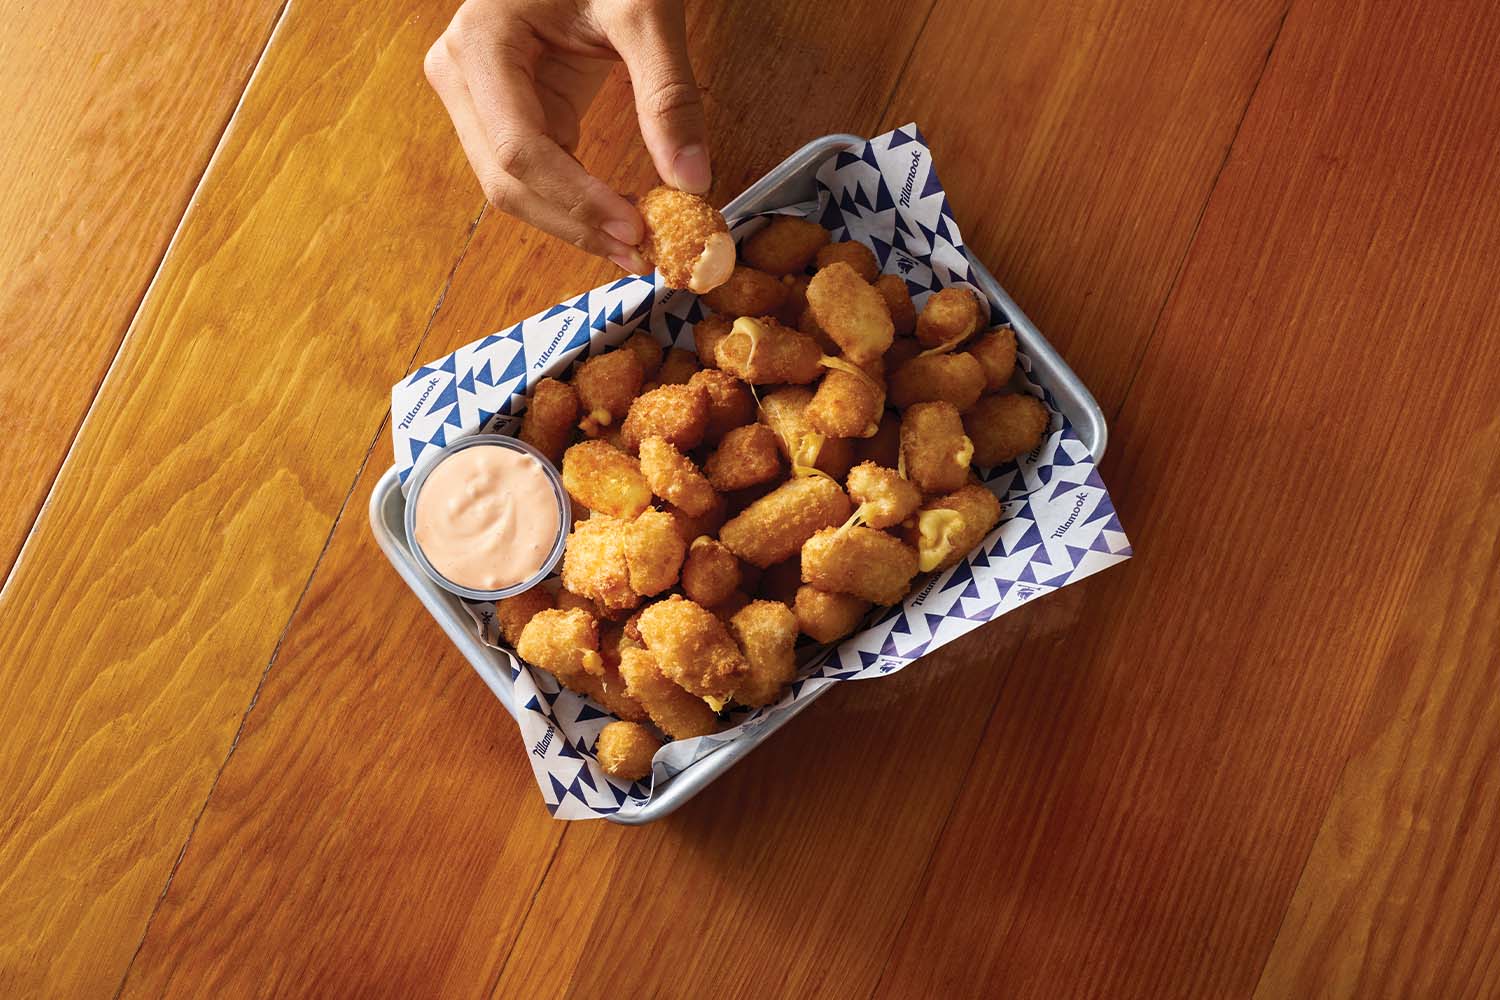 Cheese curds are served with a spicy cheddar chili ranch